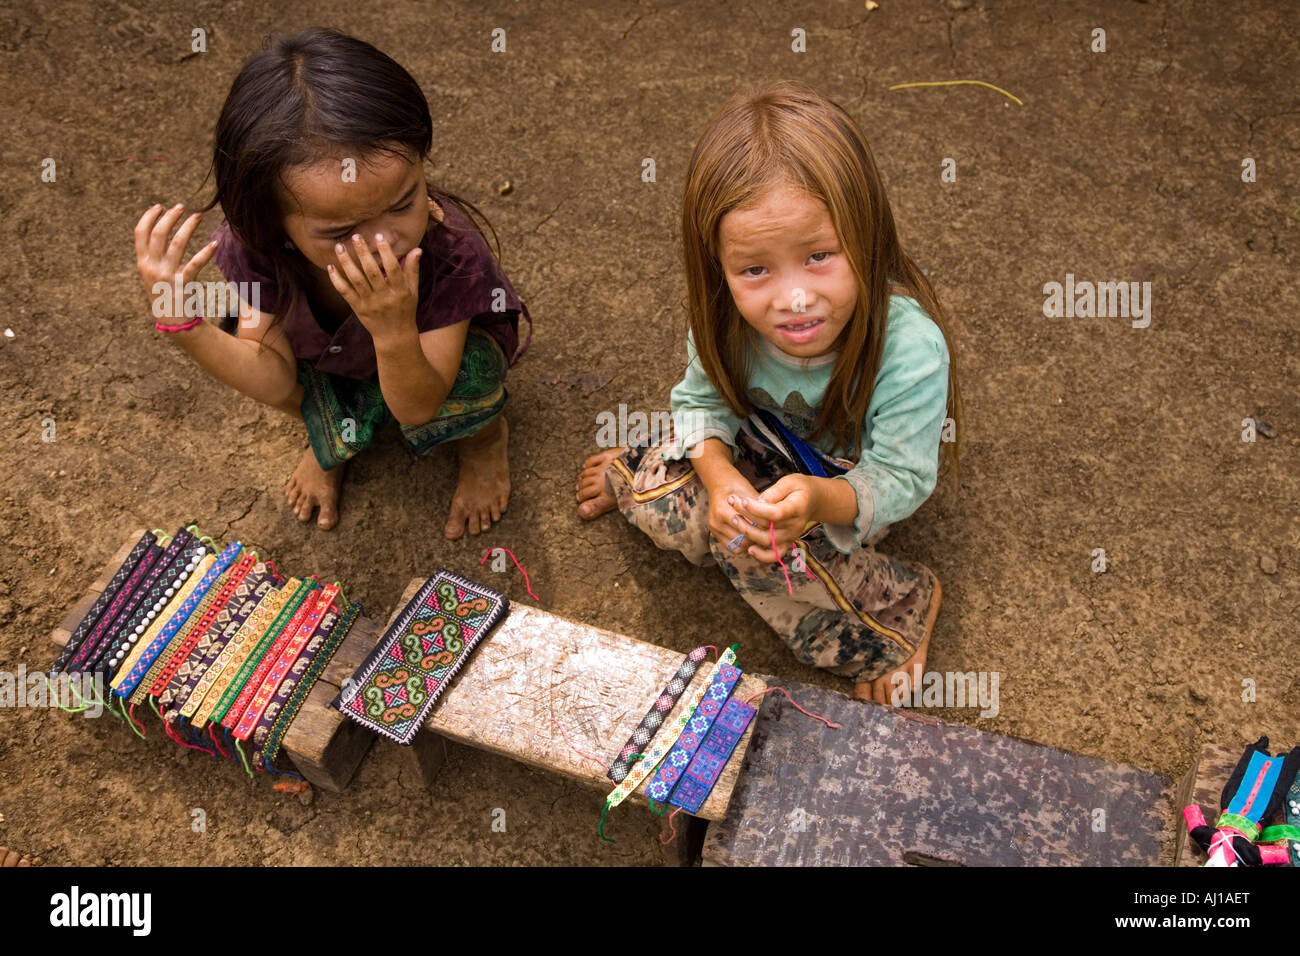 Children selling wrist bands to tourists in Hmong tribal village near Luang Prabang Laos Stock Photo